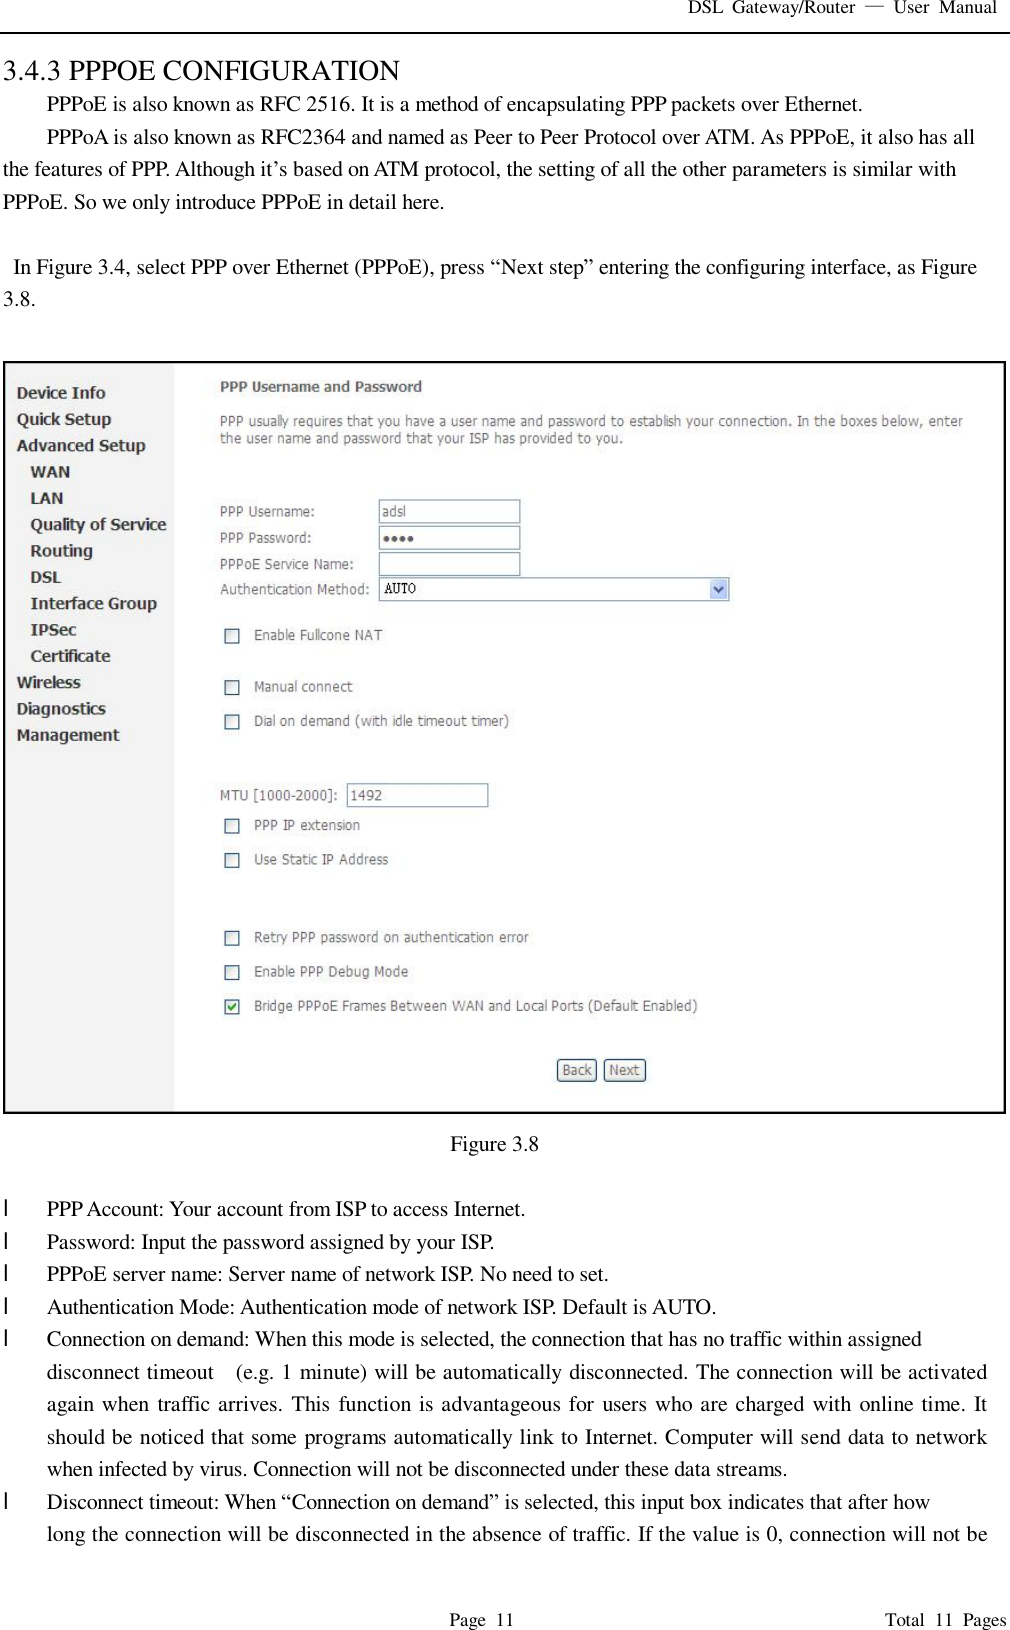 DSL Gateway/Router  — User Manual  Page 11                                       Total 11 Pages 3.4.3 PPPOE CONFIGURATION PPPoE is also known as RFC 2516. It is a method of encapsulating PPP packets over Ethernet. PPPoA is also known as RFC2364 and named as Peer to Peer Protocol over ATM. As PPPoE, it also has all the features of PPP. Although it’s based on ATM protocol, the setting of all the other parameters is similar with PPPoE. So we only introduce PPPoE in detail here.   In Figure 3.4, select PPP over Ethernet (PPPoE), press “Next step” entering the configuring interface, as Figure 3.8.   Figure 3.8  l  PPP Account: Your account from ISP to access Internet. l  Password: Input the password assigned by your ISP. l  PPPoE server name: Server name of network ISP. No need to set. l  Authentication Mode: Authentication mode of network ISP. Default is AUTO. l  Connection on demand: When this mode is selected, the connection that has no traffic within assigned disconnect timeout  (e.g. 1 minute) will be automatically disconnected. The connection will be activated again when traffic arrives. This function is advantageous for users who are charged with online time. It should be noticed that some programs automatically link to Internet. Computer will send data to network when infected by virus. Connection will not be disconnected under these data streams. l  Disconnect timeout: When “Connection on demand” is selected, this input box indicates that after how  long the connection will be disconnected in the absence of traffic. If the value is 0, connection will not be 